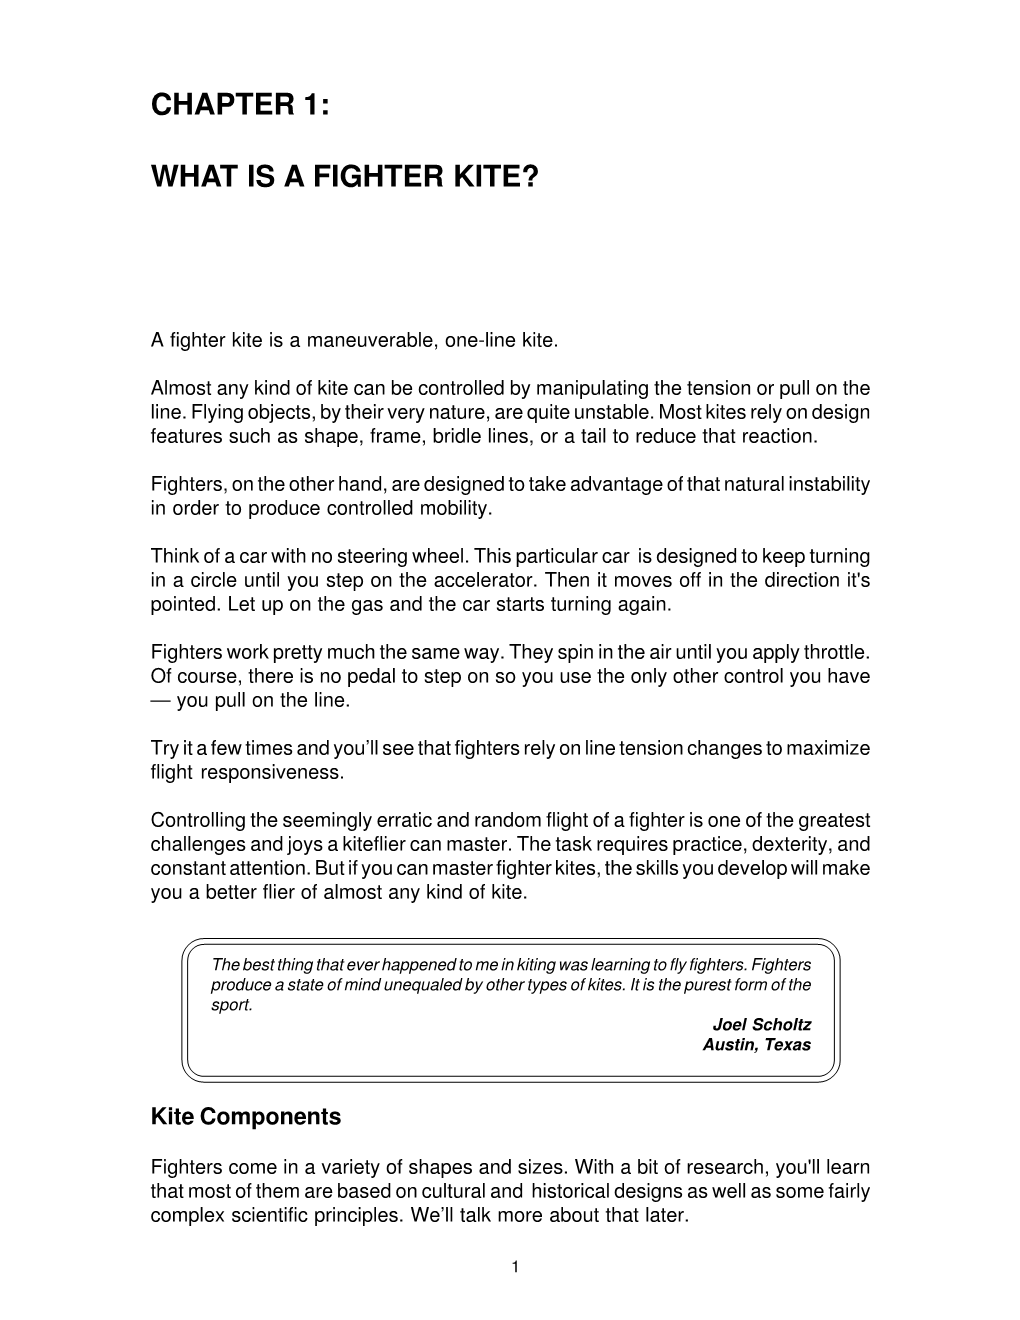 Chapter 1: What Is a Fighter Kite?